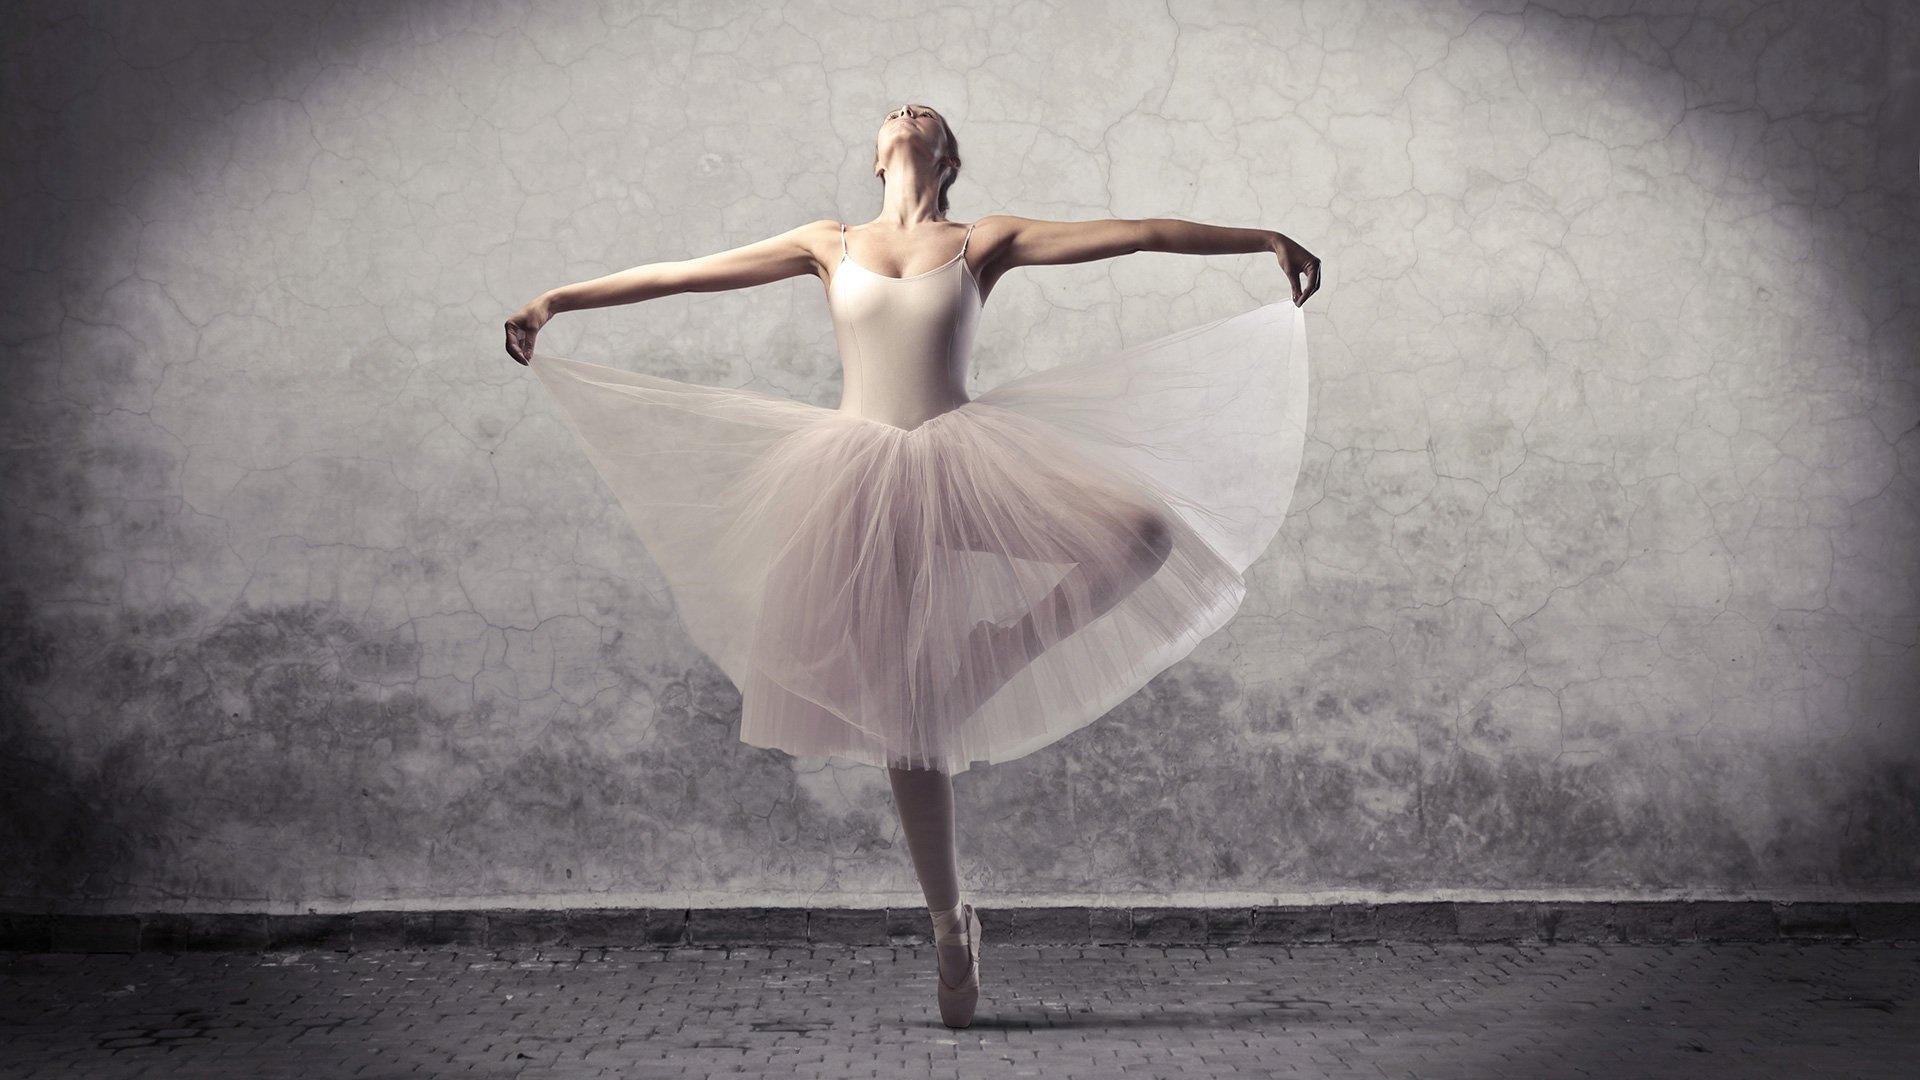 Ballet: Ballerina, An art form created by the movement of the human body, Tutu. 1920x1080 Full HD Background.